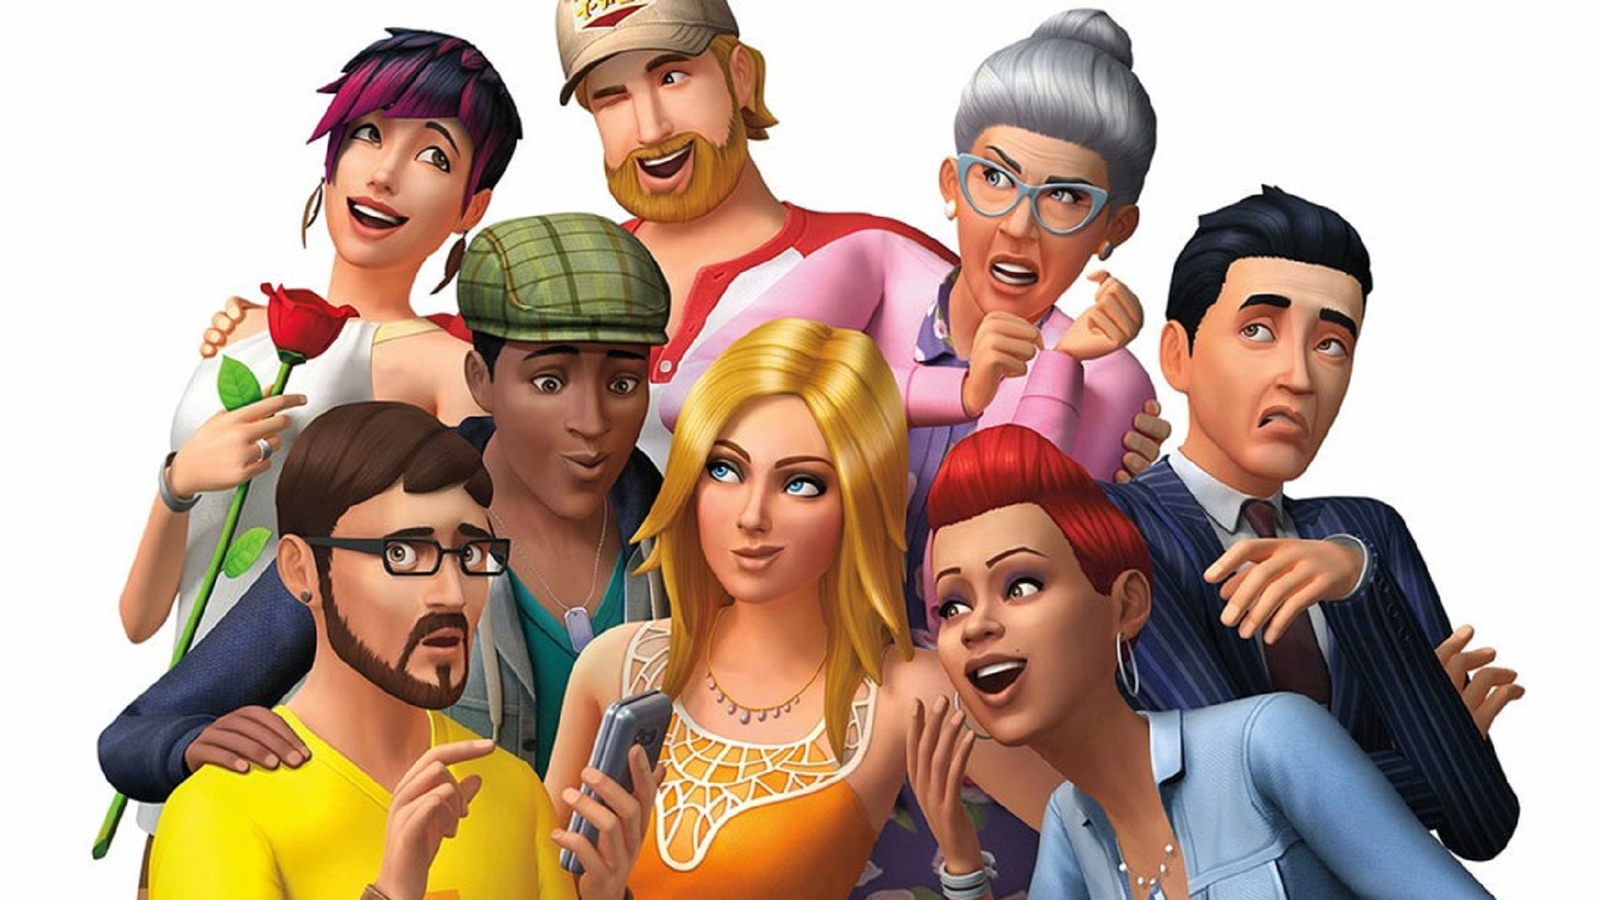 The Sims 4 Cheats (Full Updated List for PC/Xbox/PS4)